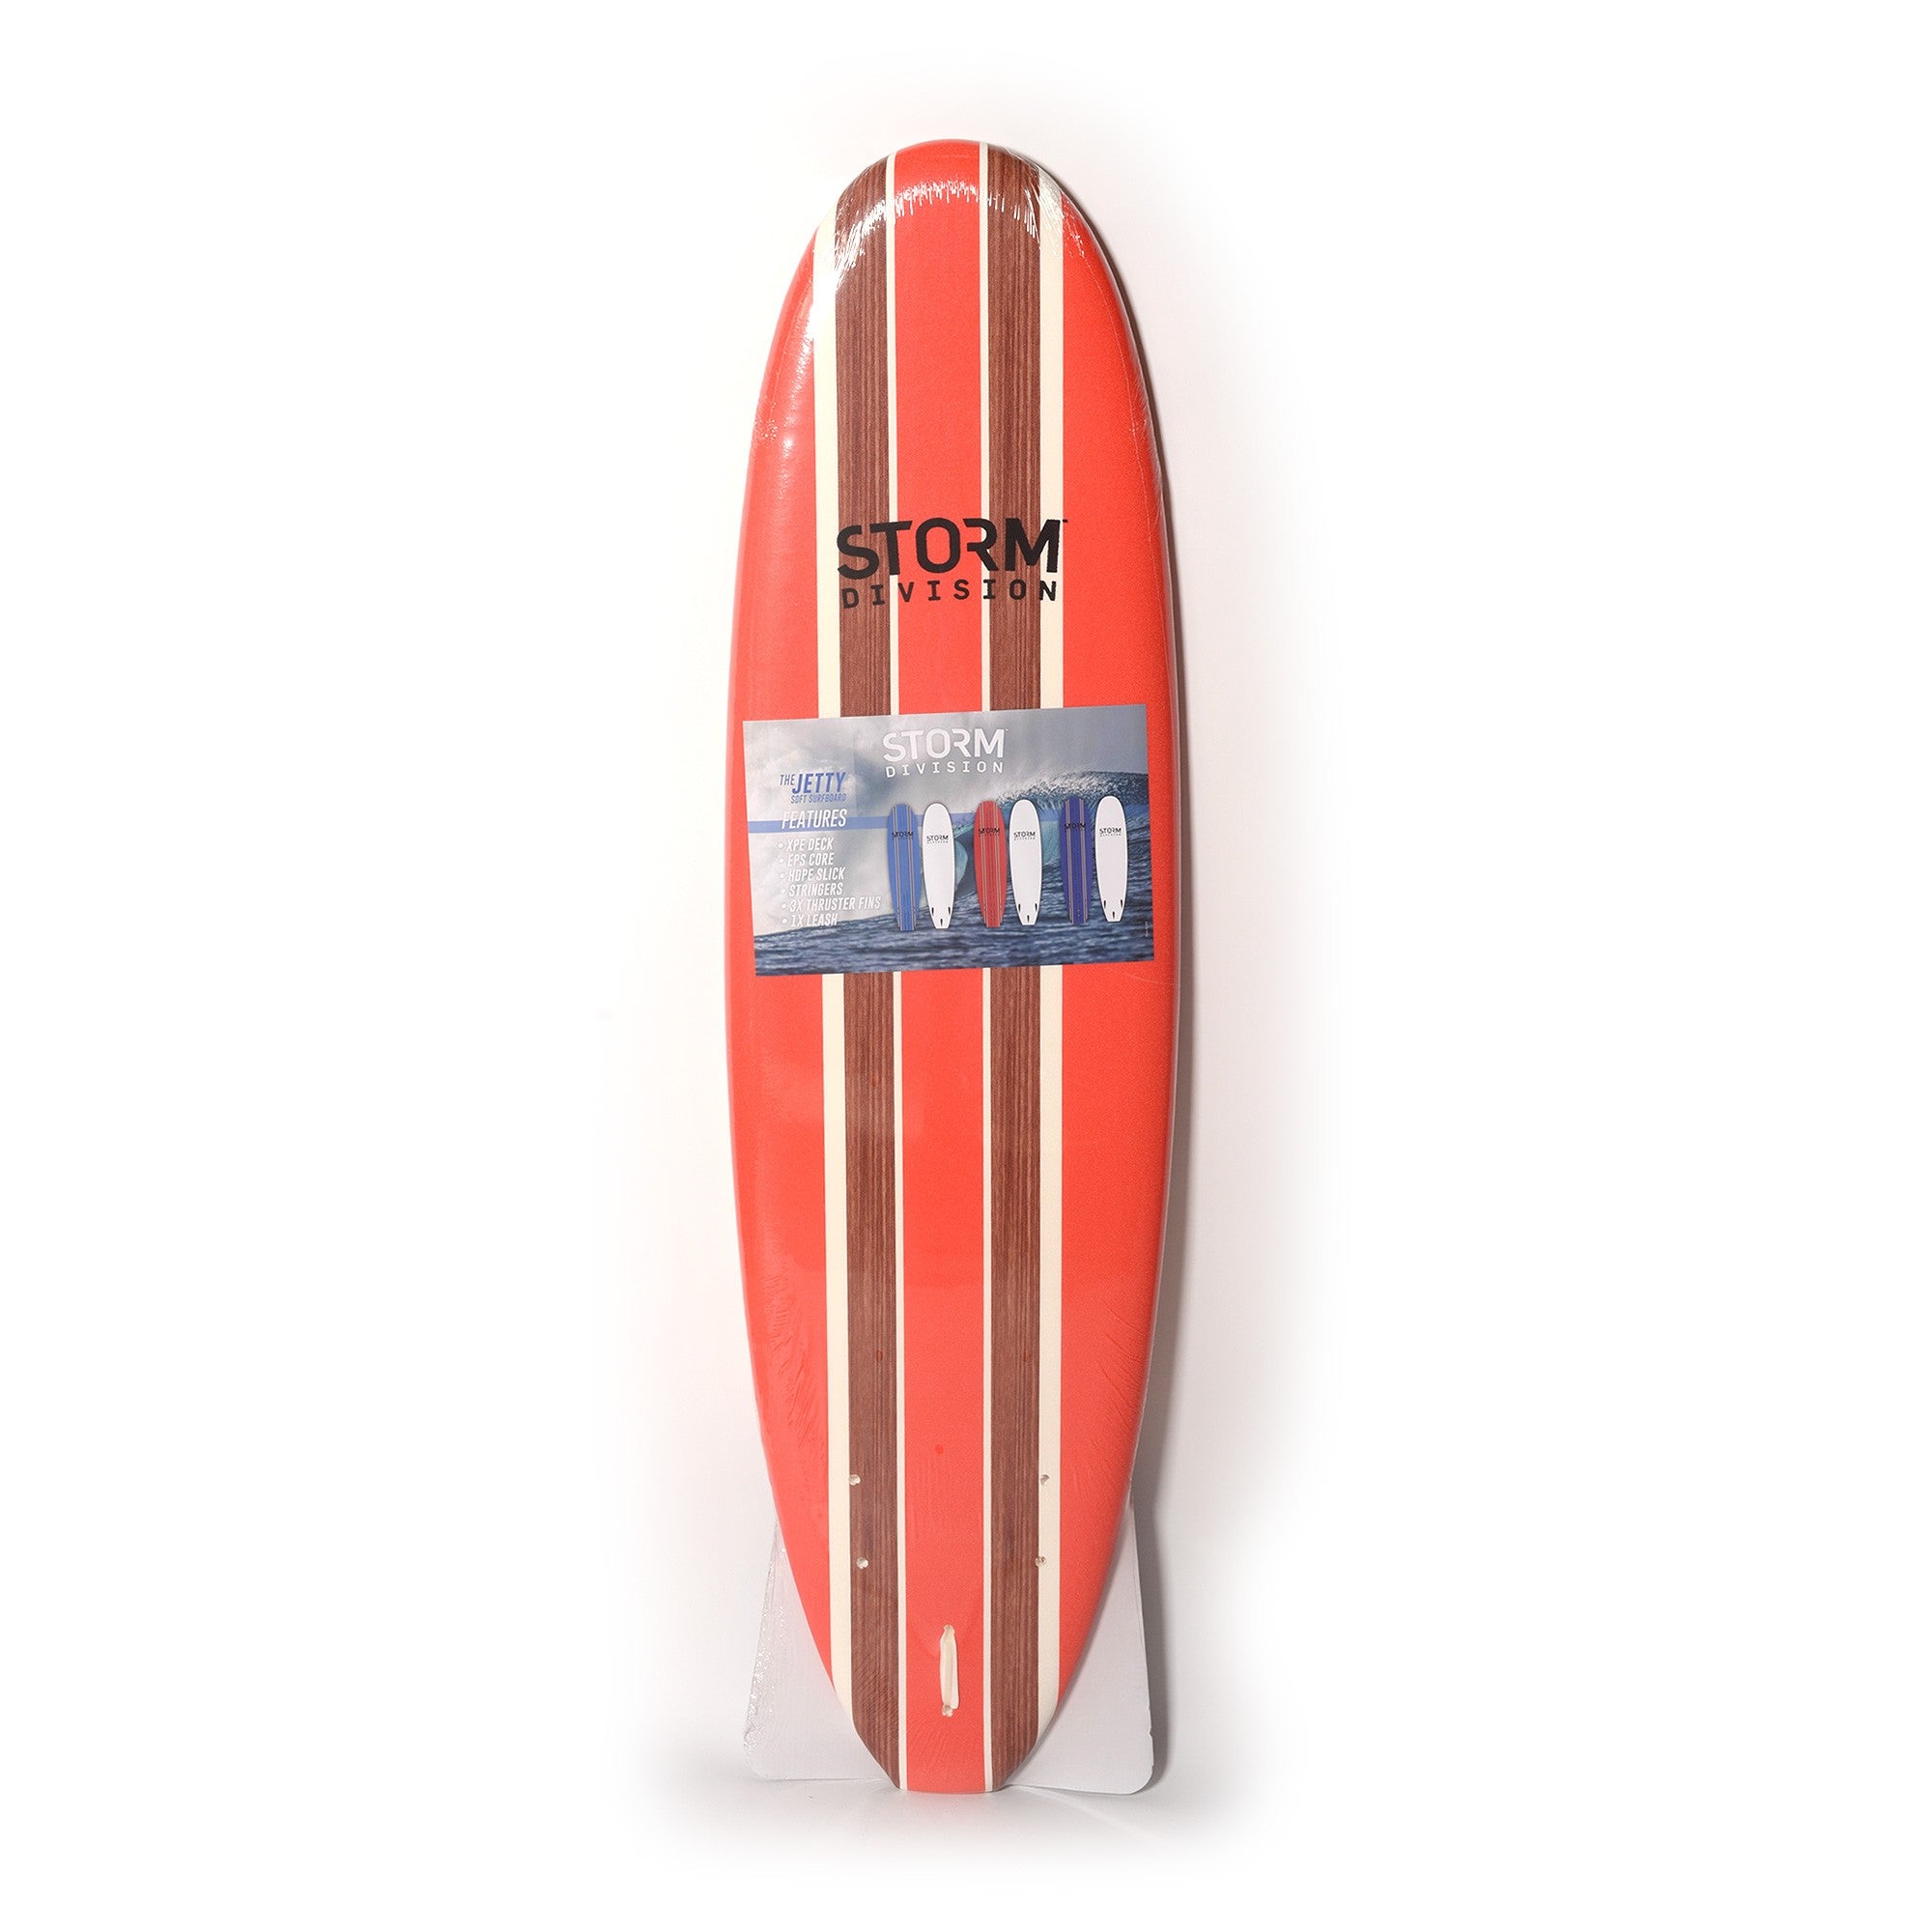 STORM DIVISION - Jetty Softboard - Foam Surfboard - 6'2 - Red